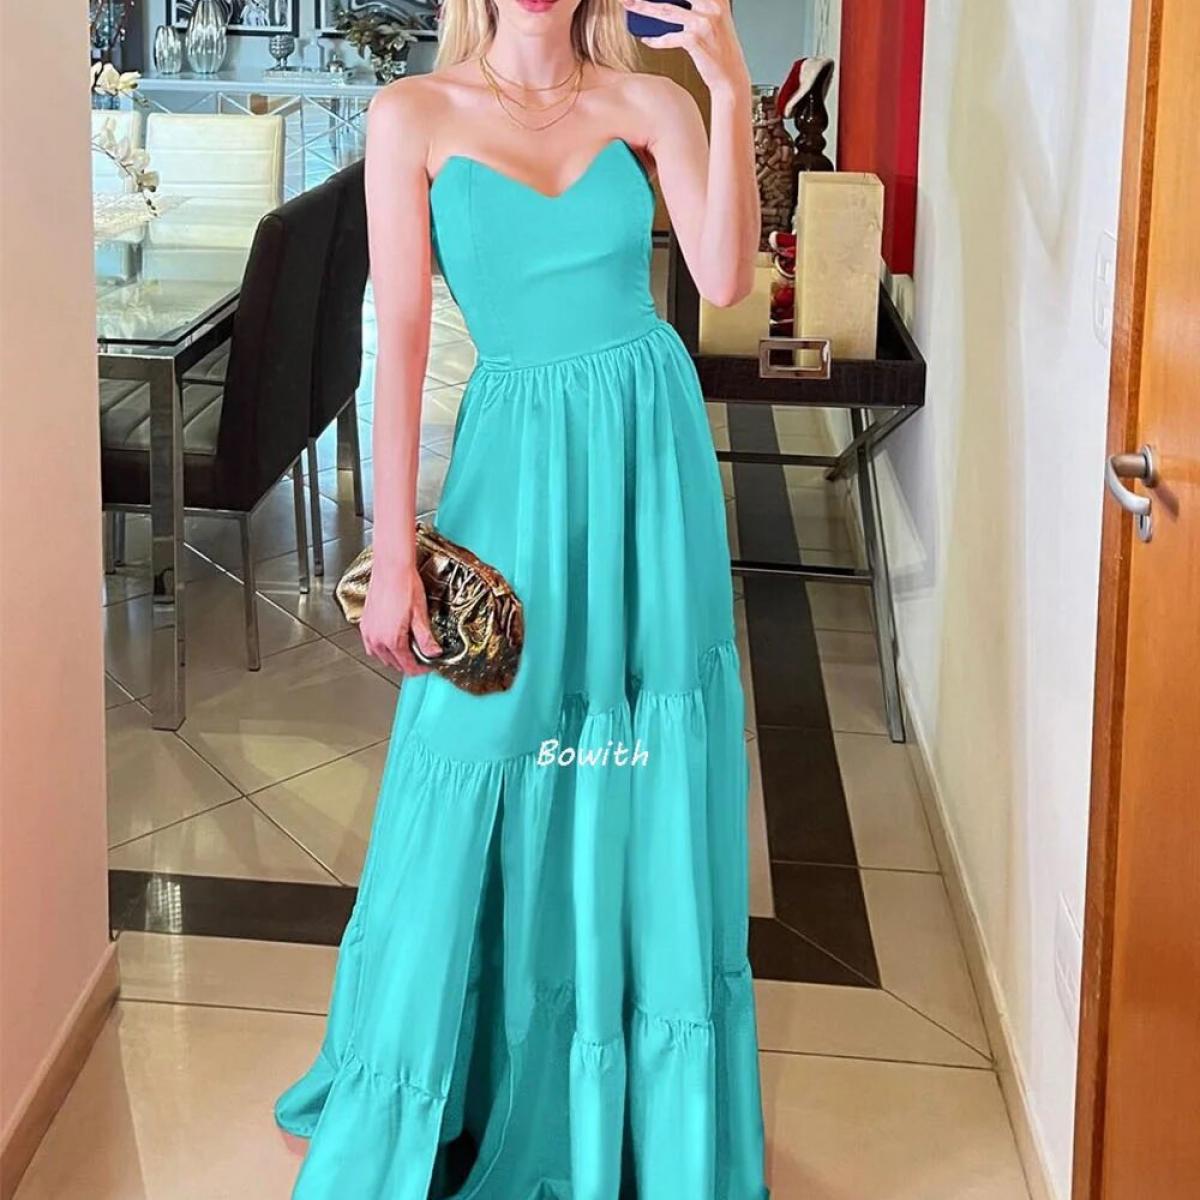 Bowith Strapless Evening Party Dresses A Line Prom Gown Lace Up Back Elegant Birthday Party Dress Vestidos De Fiesta